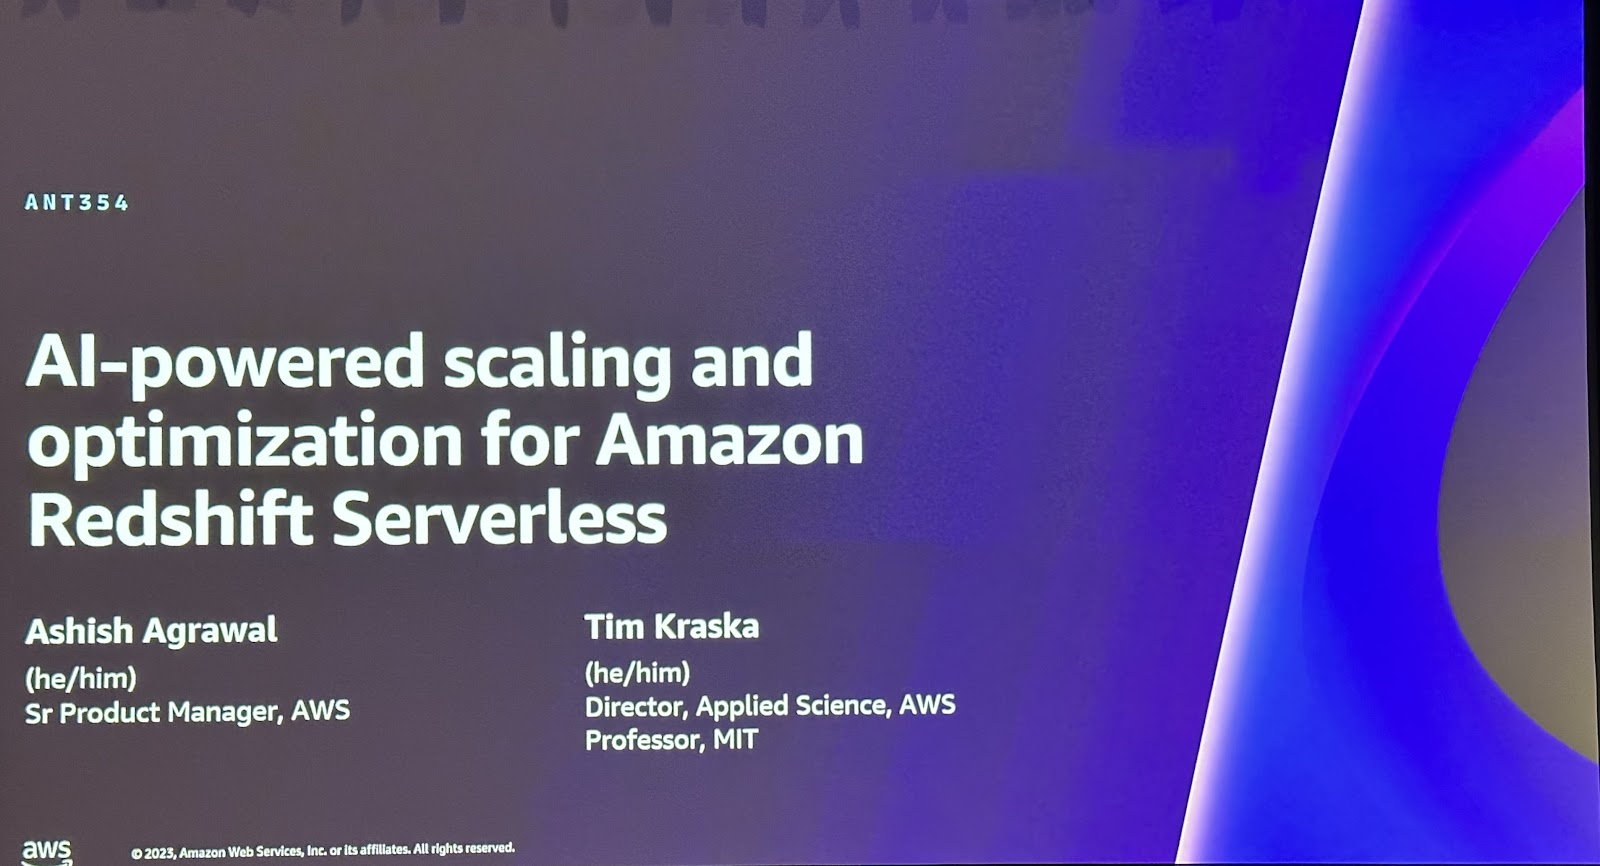 AI-powered scaling and optimization for Amazon Redshift Serverless